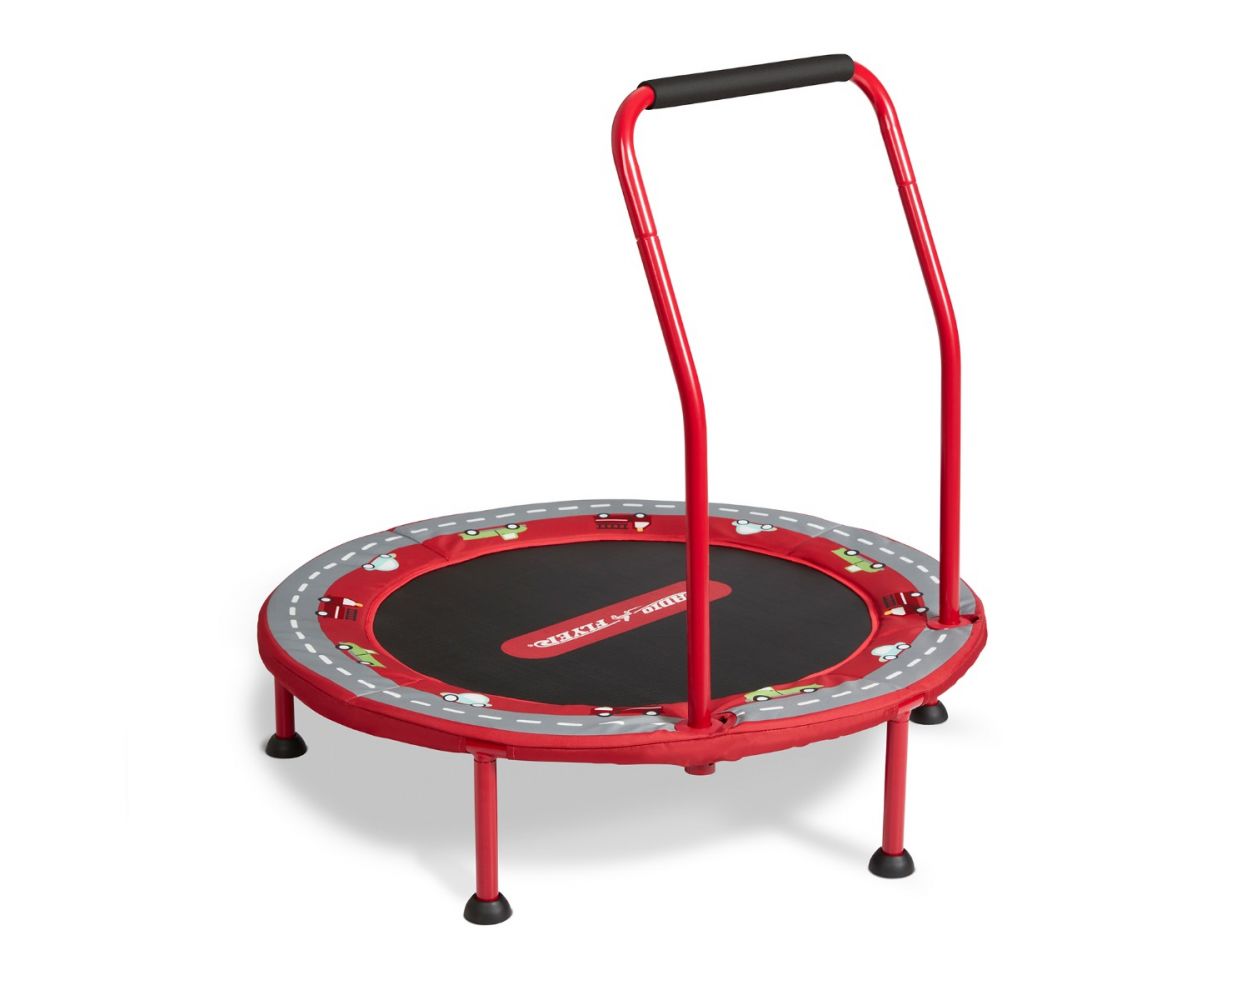 Jump for Joy: Children's Trampoline - Fun and Safe Outdoor Play